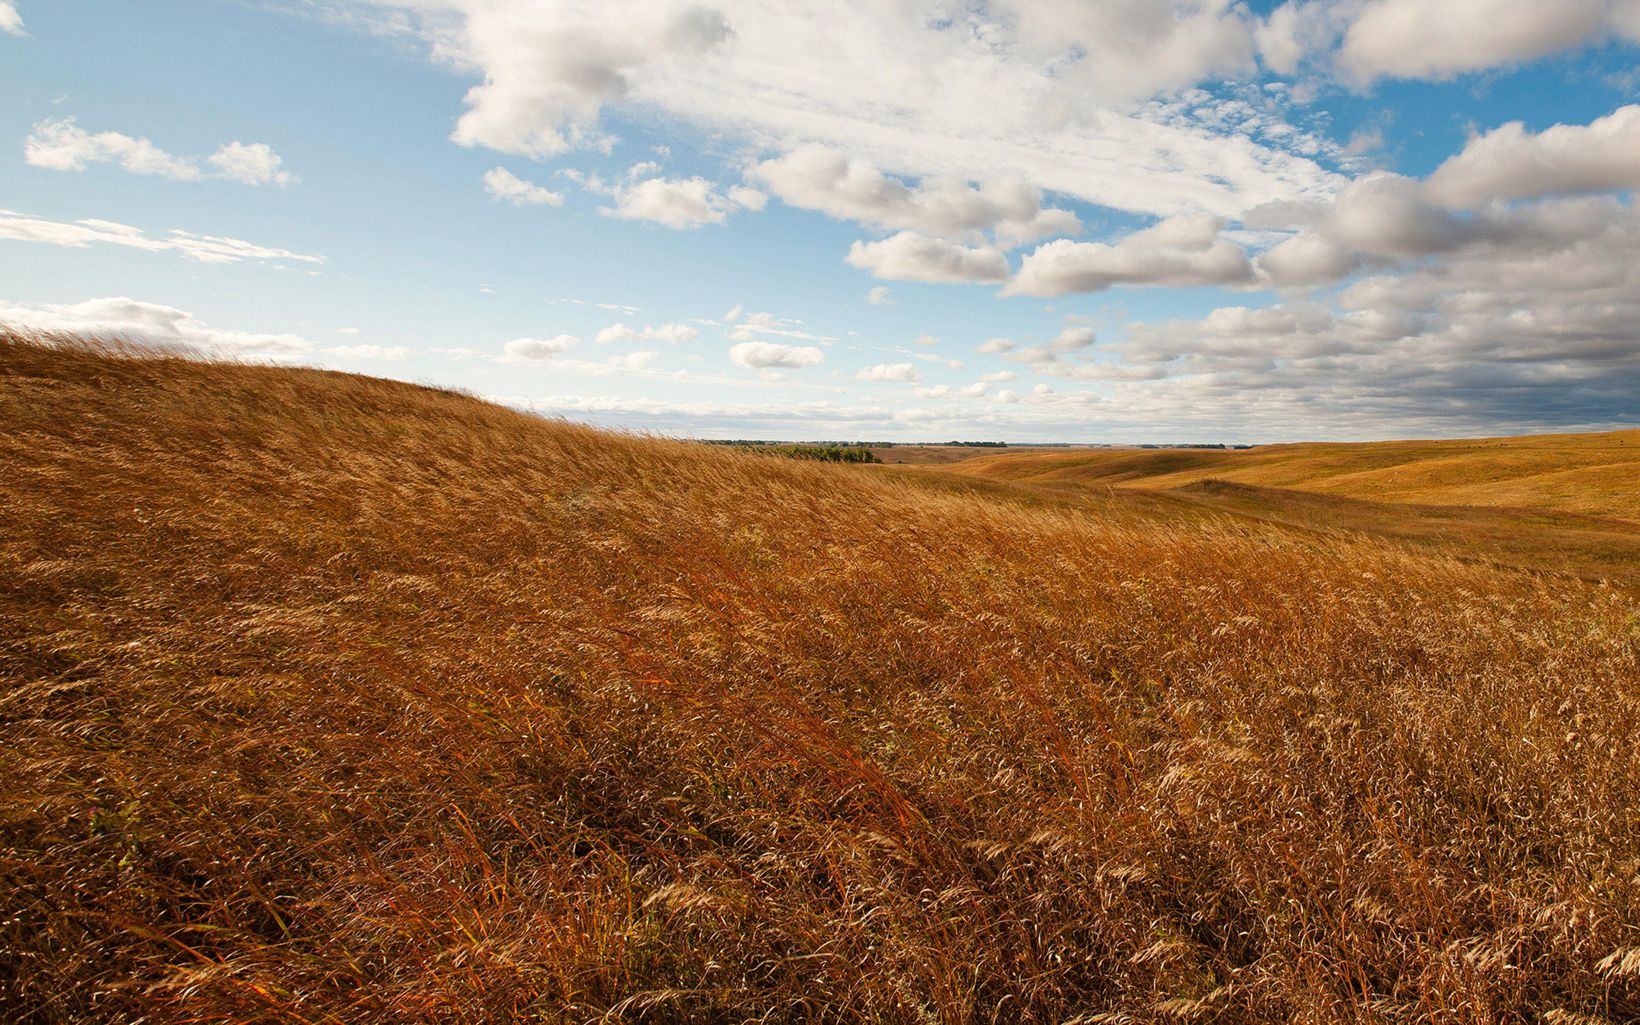 An open grassland pasture in fall with wind blowing in the grasses.